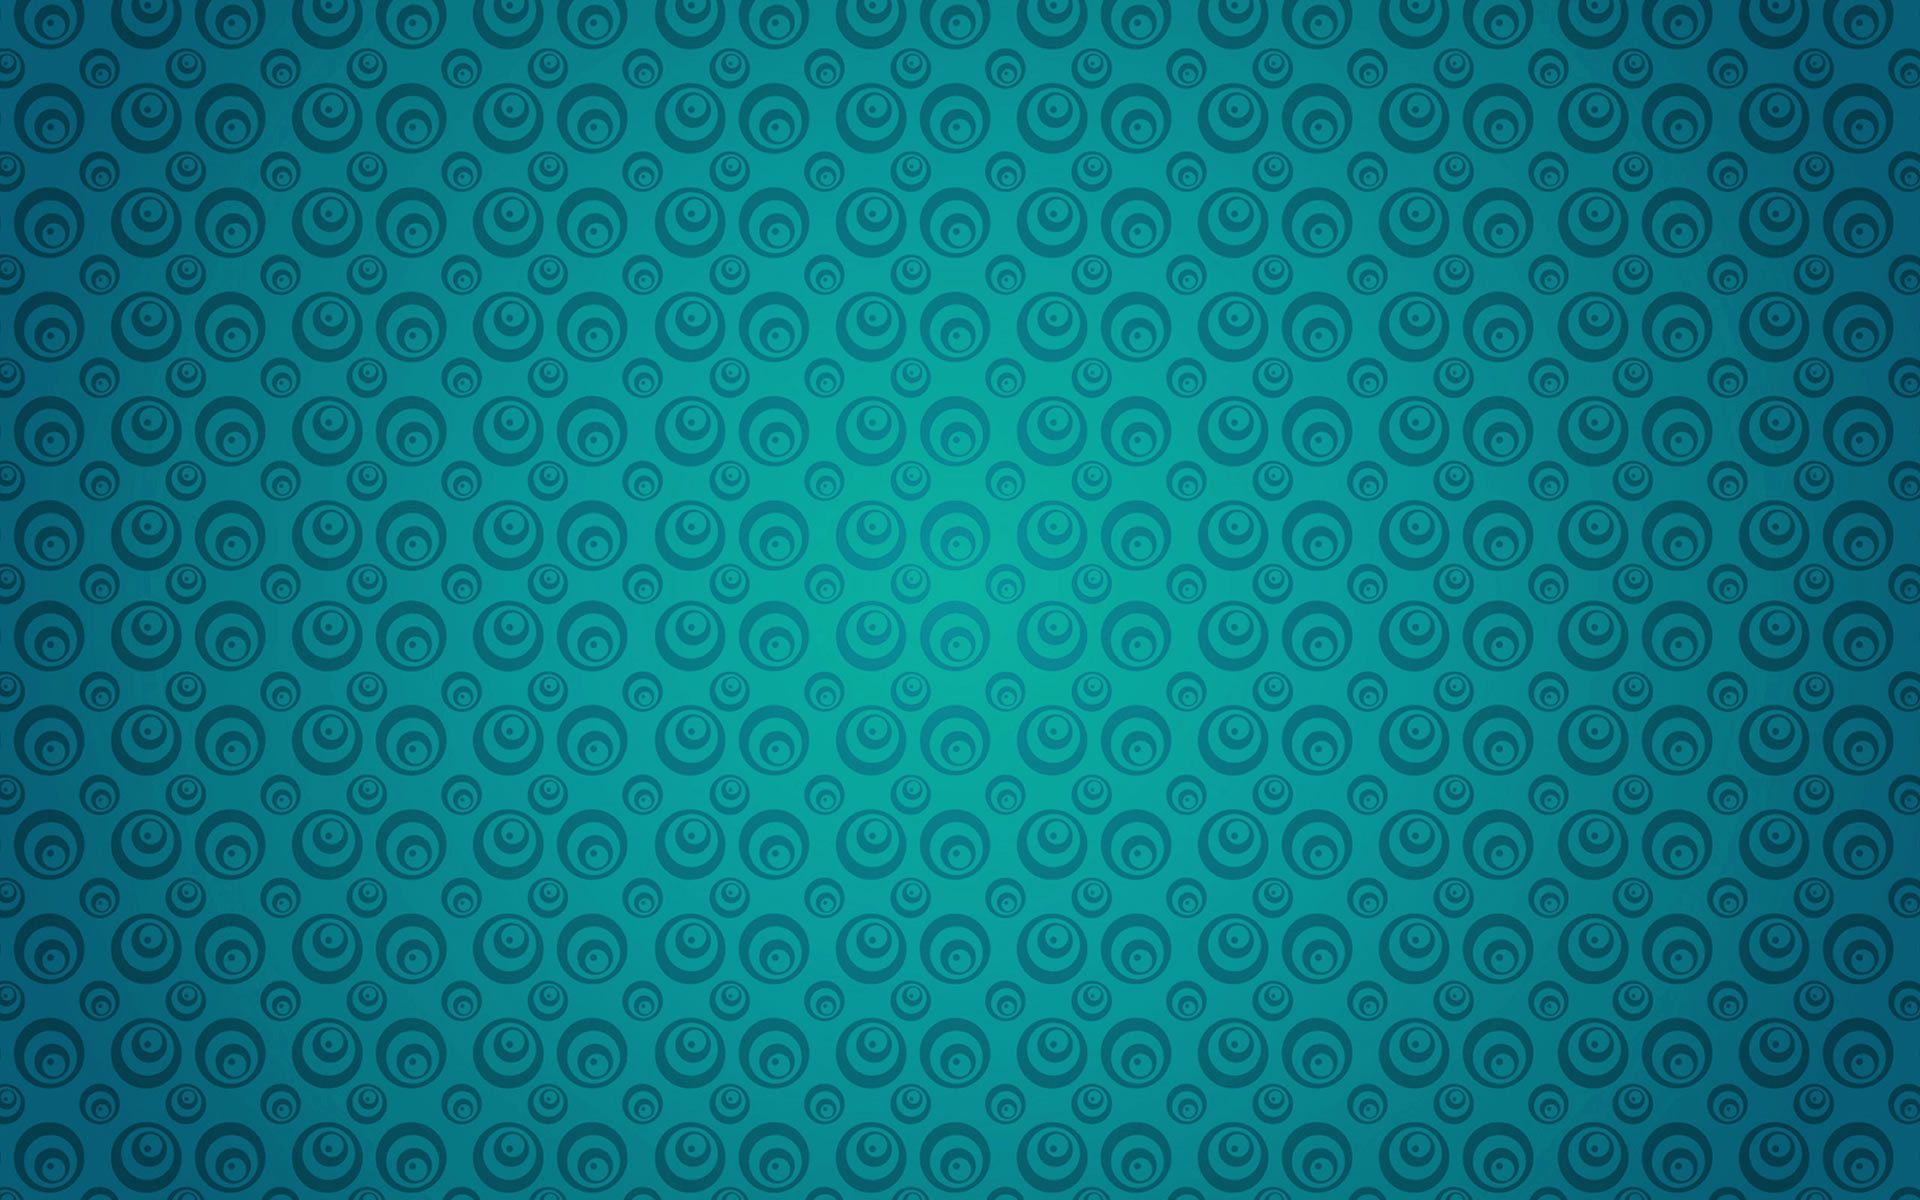 Cool Wallpapers patterns, turquoise, circles, texture, textures, surface